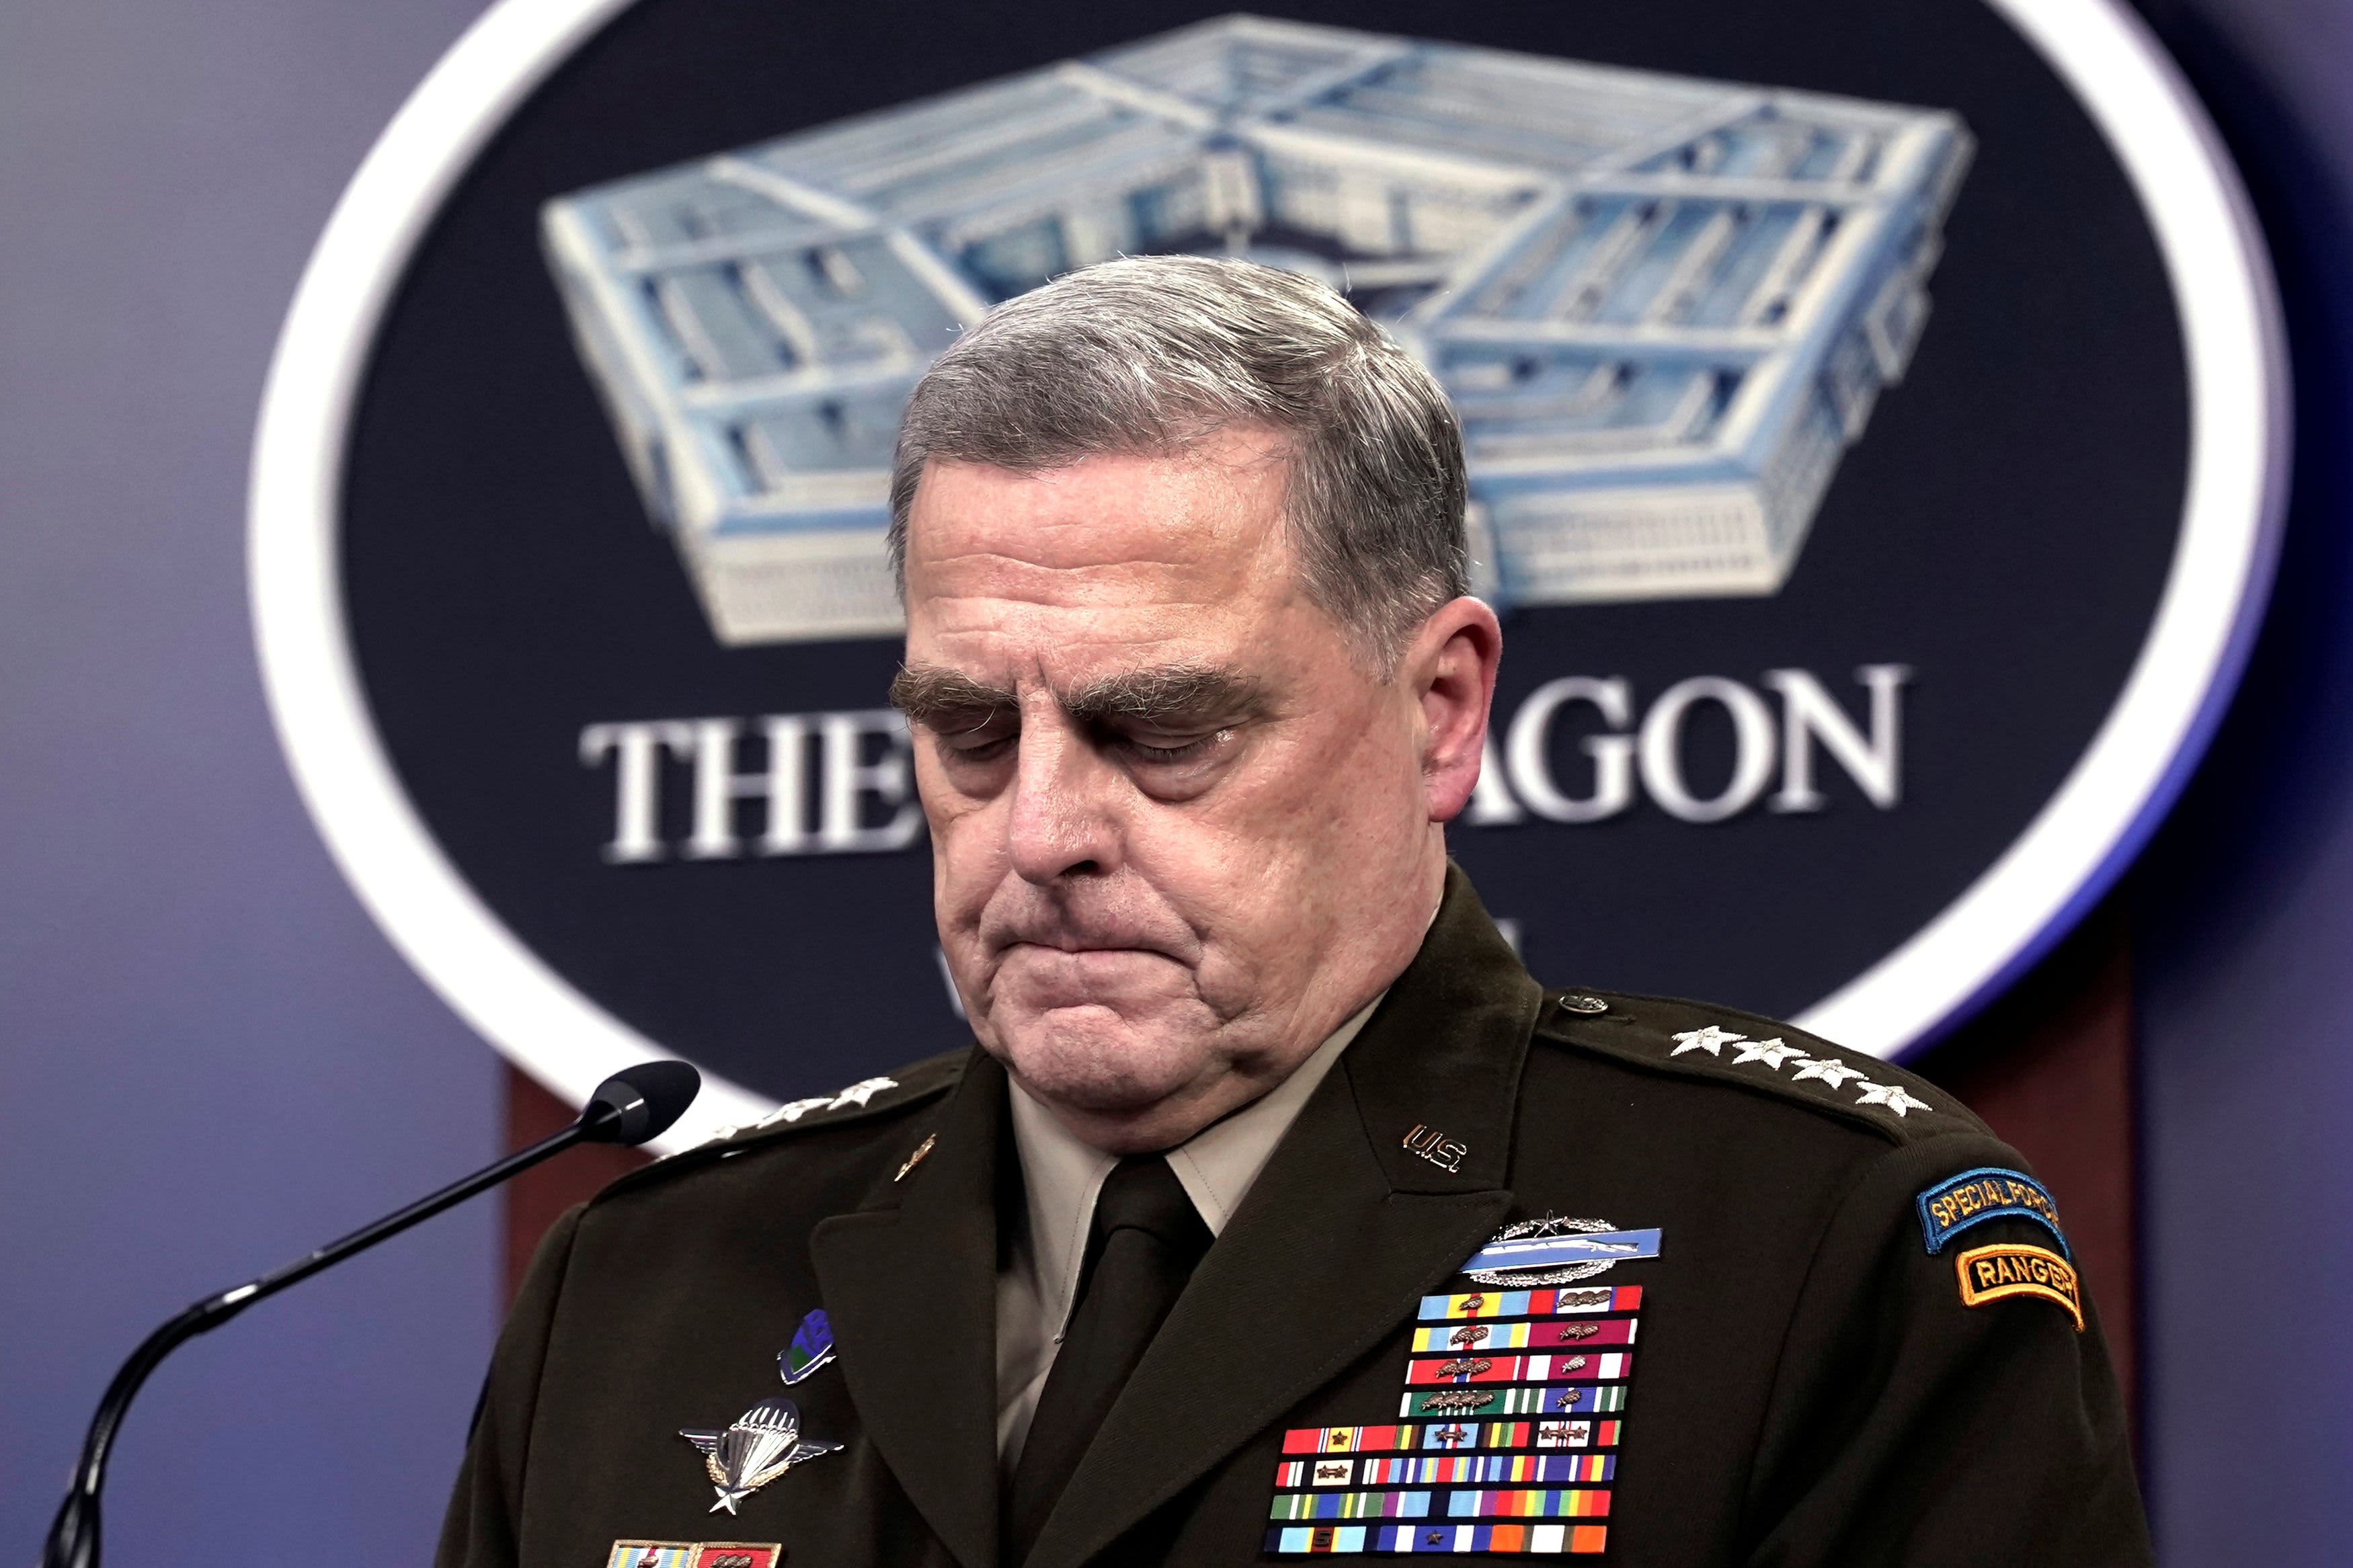 Top general Milley reassured China others in secret calls as Trump pushed election lies spokesman says – CNBC